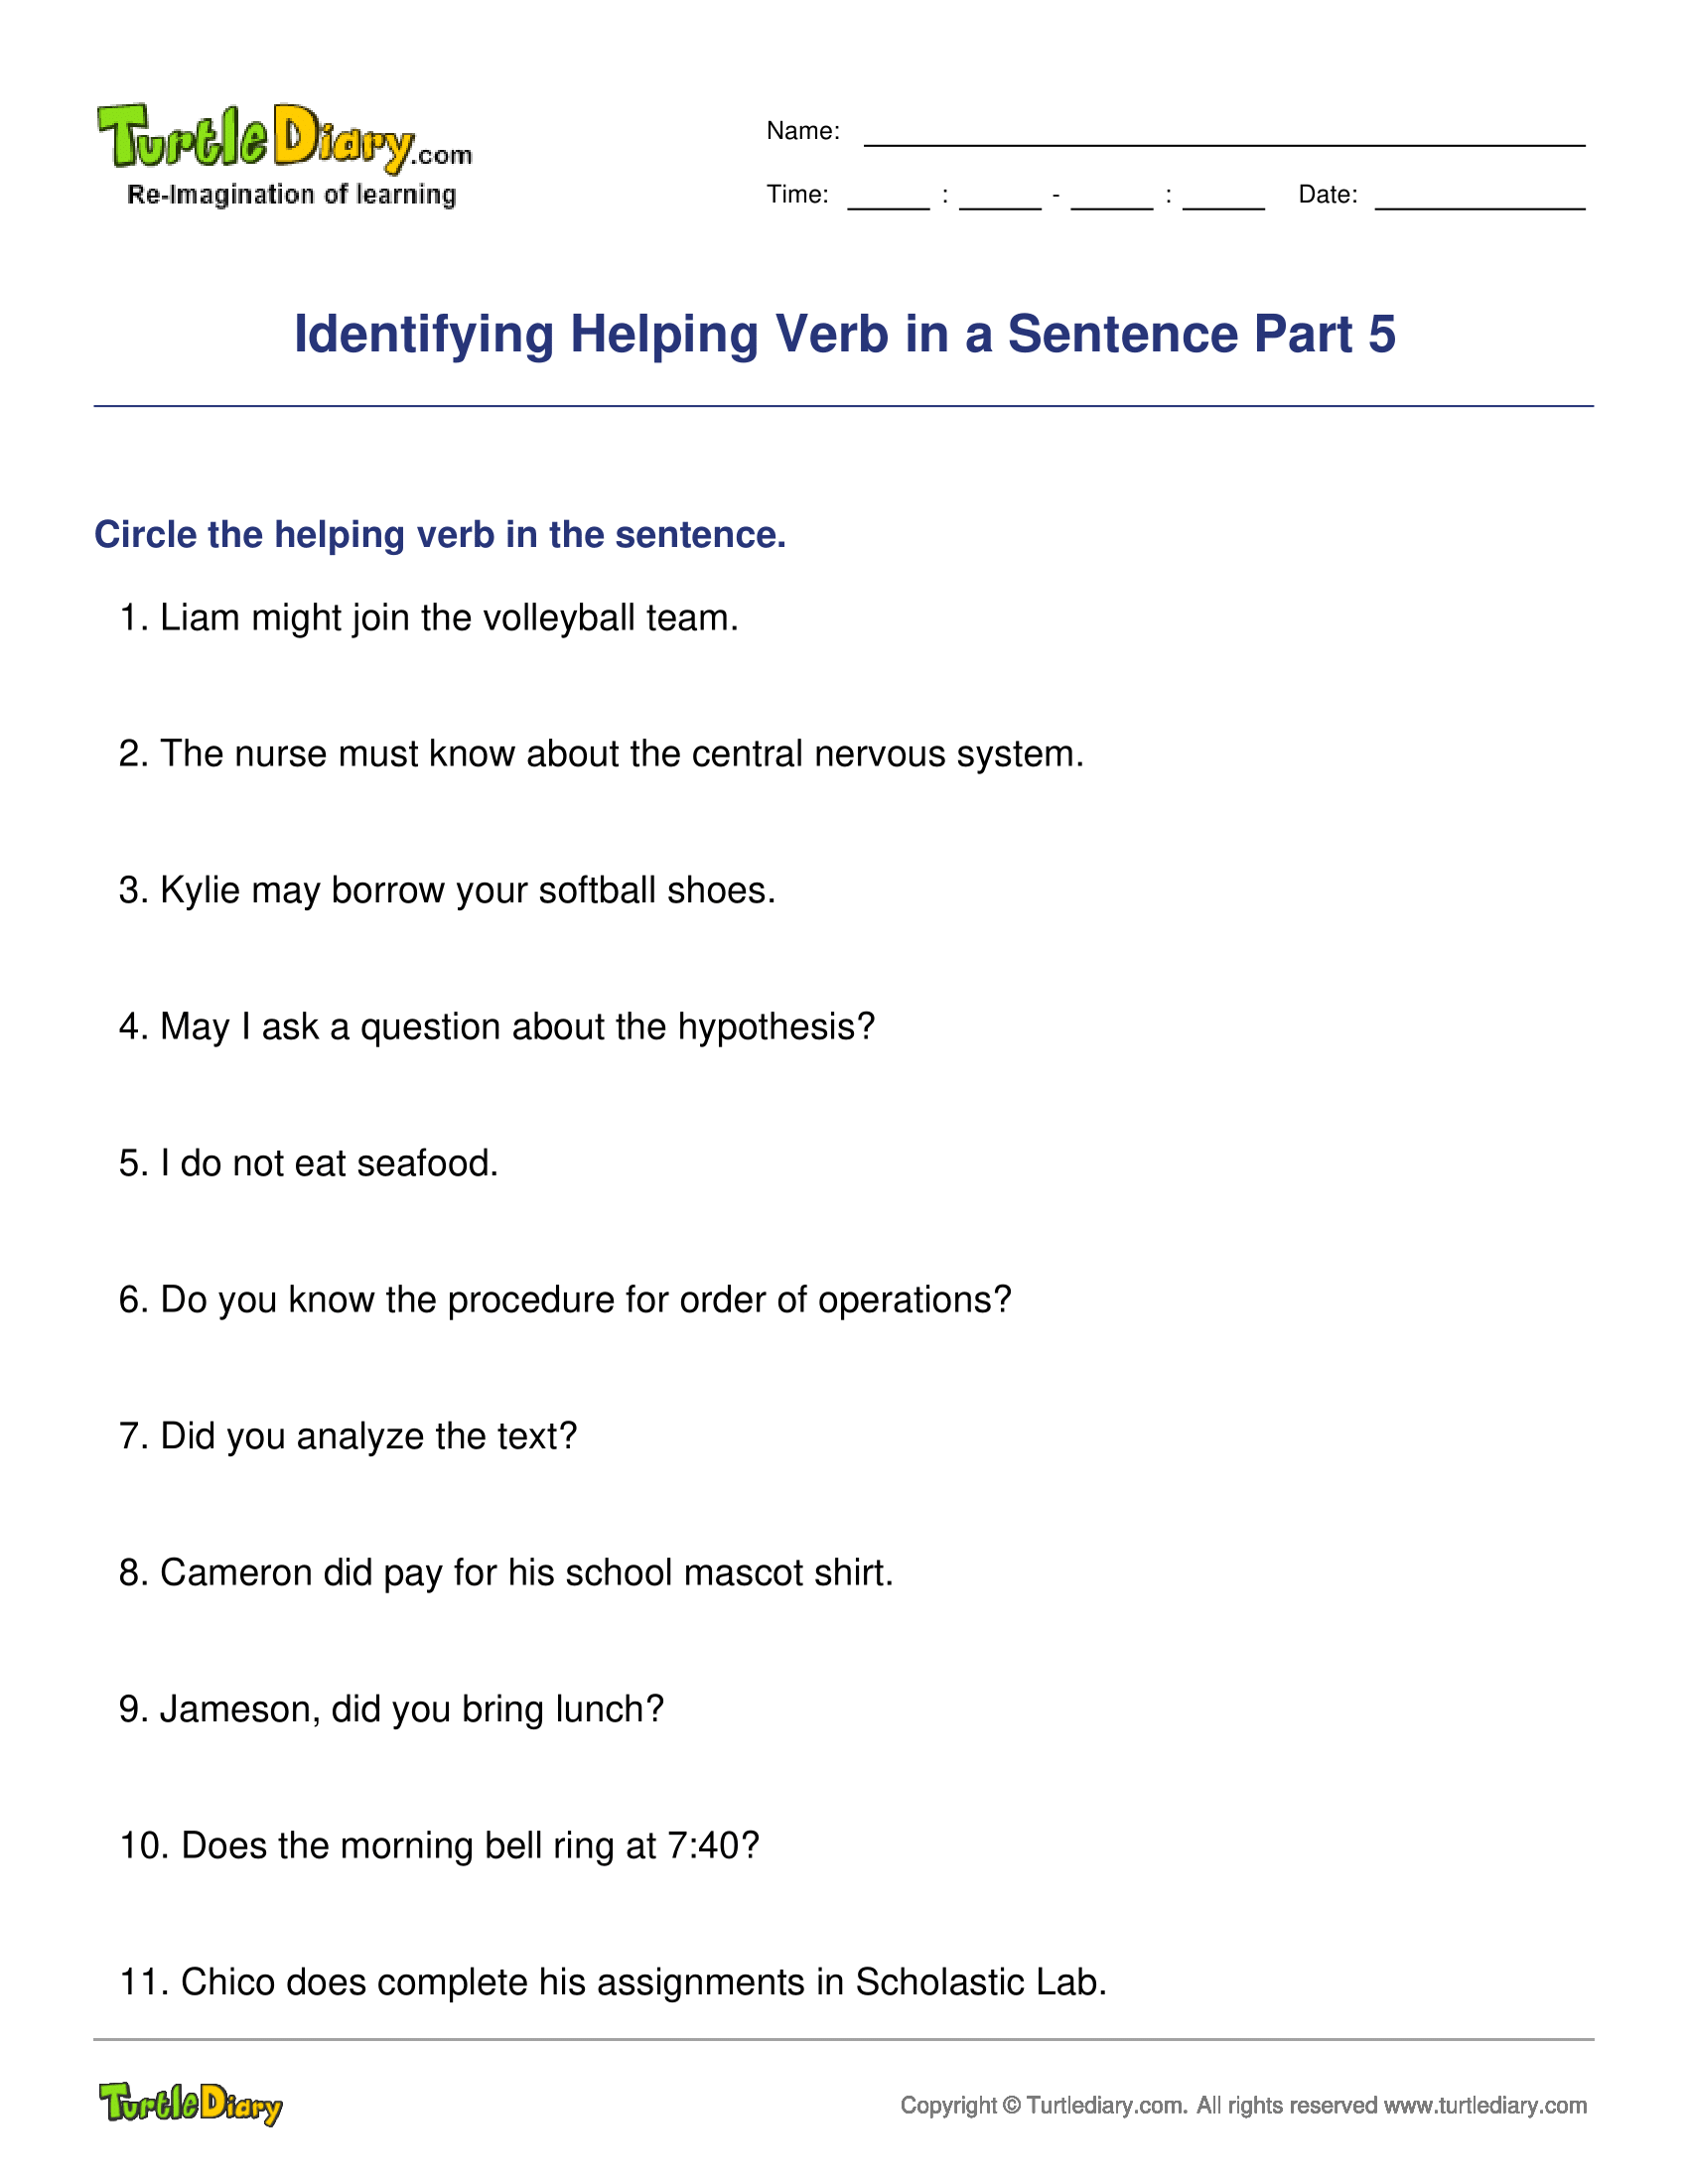 Identifying Helping Verb in a Sentence Part 5